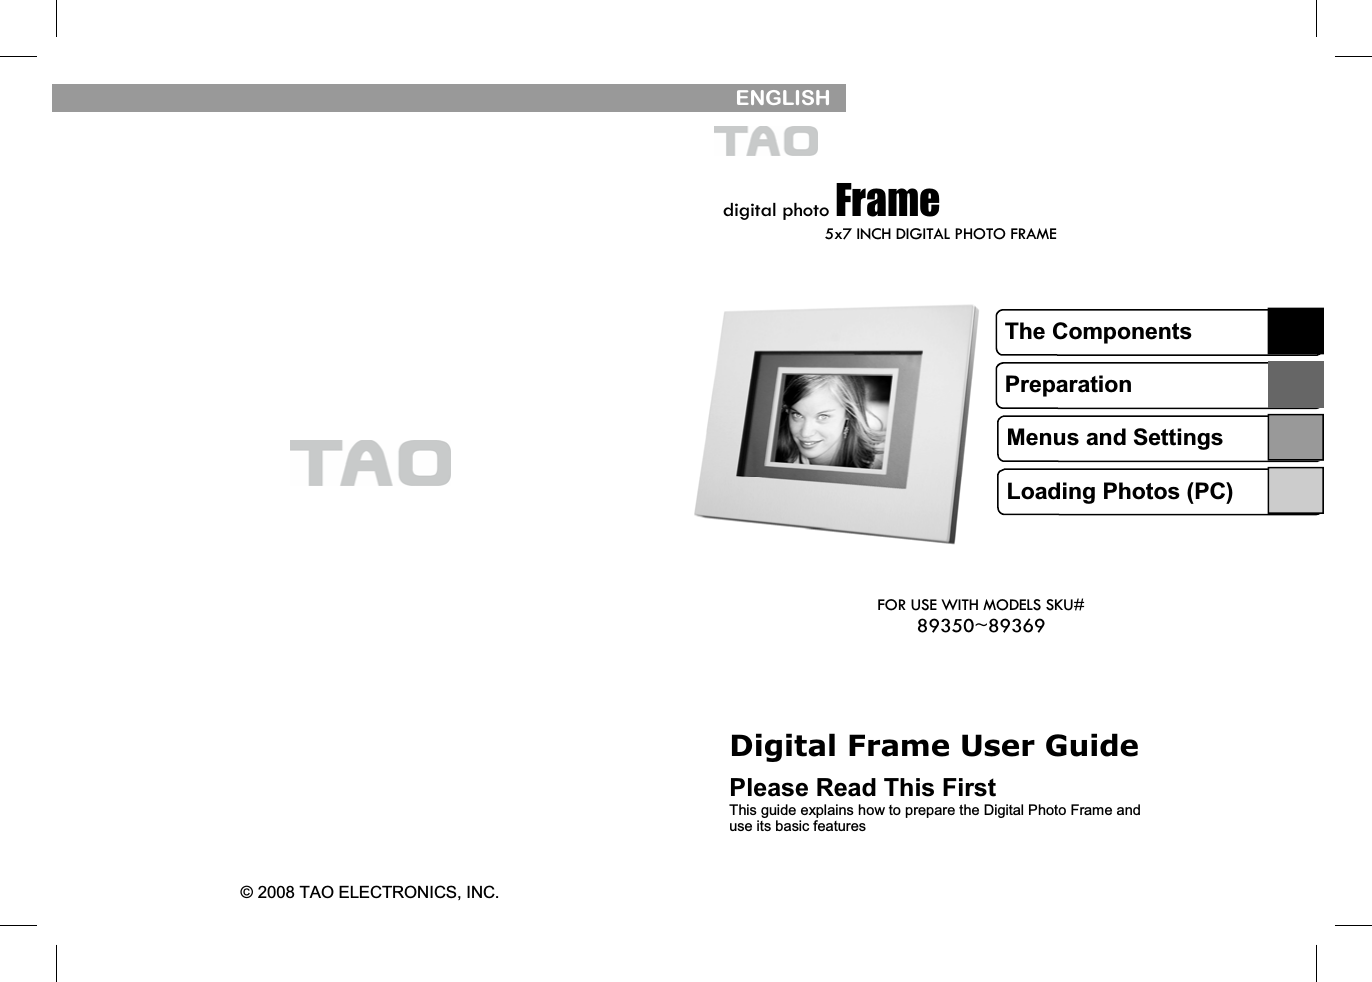    © 2008 TAO ELECTRONICS, INC.    ENGLISH   digital photo Frame 5x7 INCH DIGITAL PHOTO FRAME Digital Frame User Guide  Please Read This First This guide explains how to prepare the Digital Photo Frame and use its basic features The Components Preparation Menus and Settings Loading Photos (PC) FOR USE WITH MODELS SKU# 89350~89369 